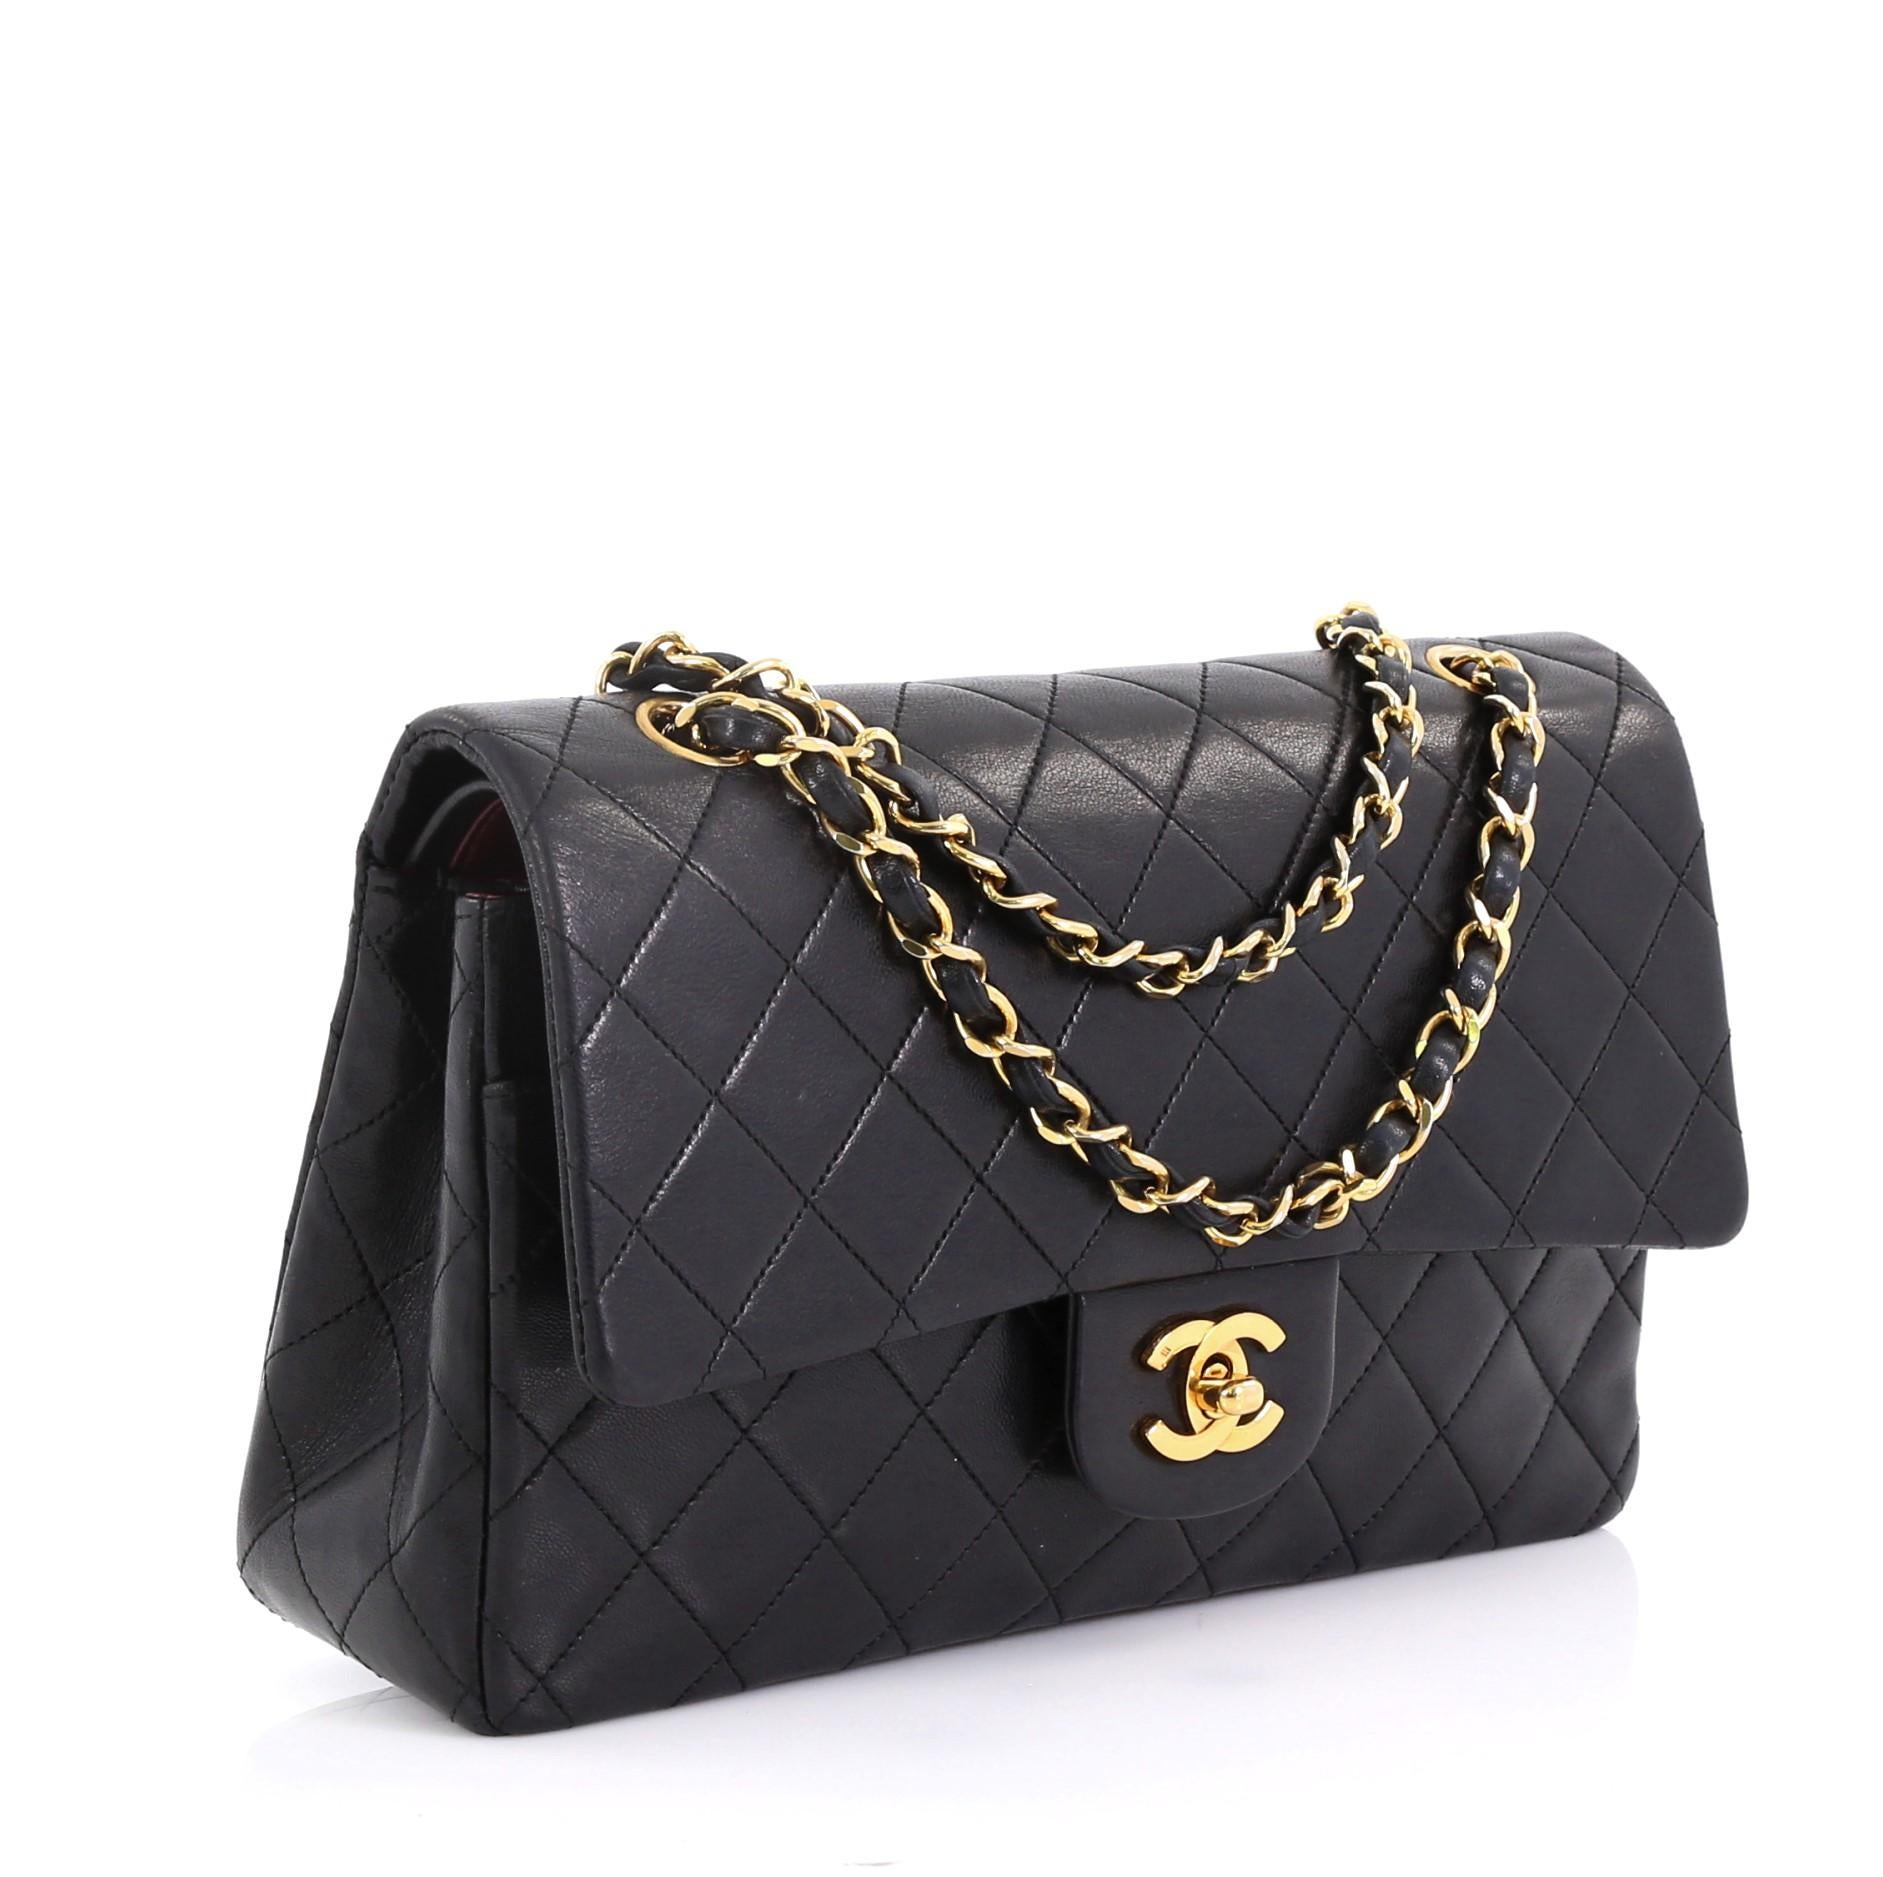 This Chanel Vintage Classic Double Flap Bag Quilted Lambskin Medium, crafted from black quilted lambskin leather, features woven-in leather chain strap, exterior back pocket and gold-tone hardware. Its double flap and frontal CC turn-lock closure